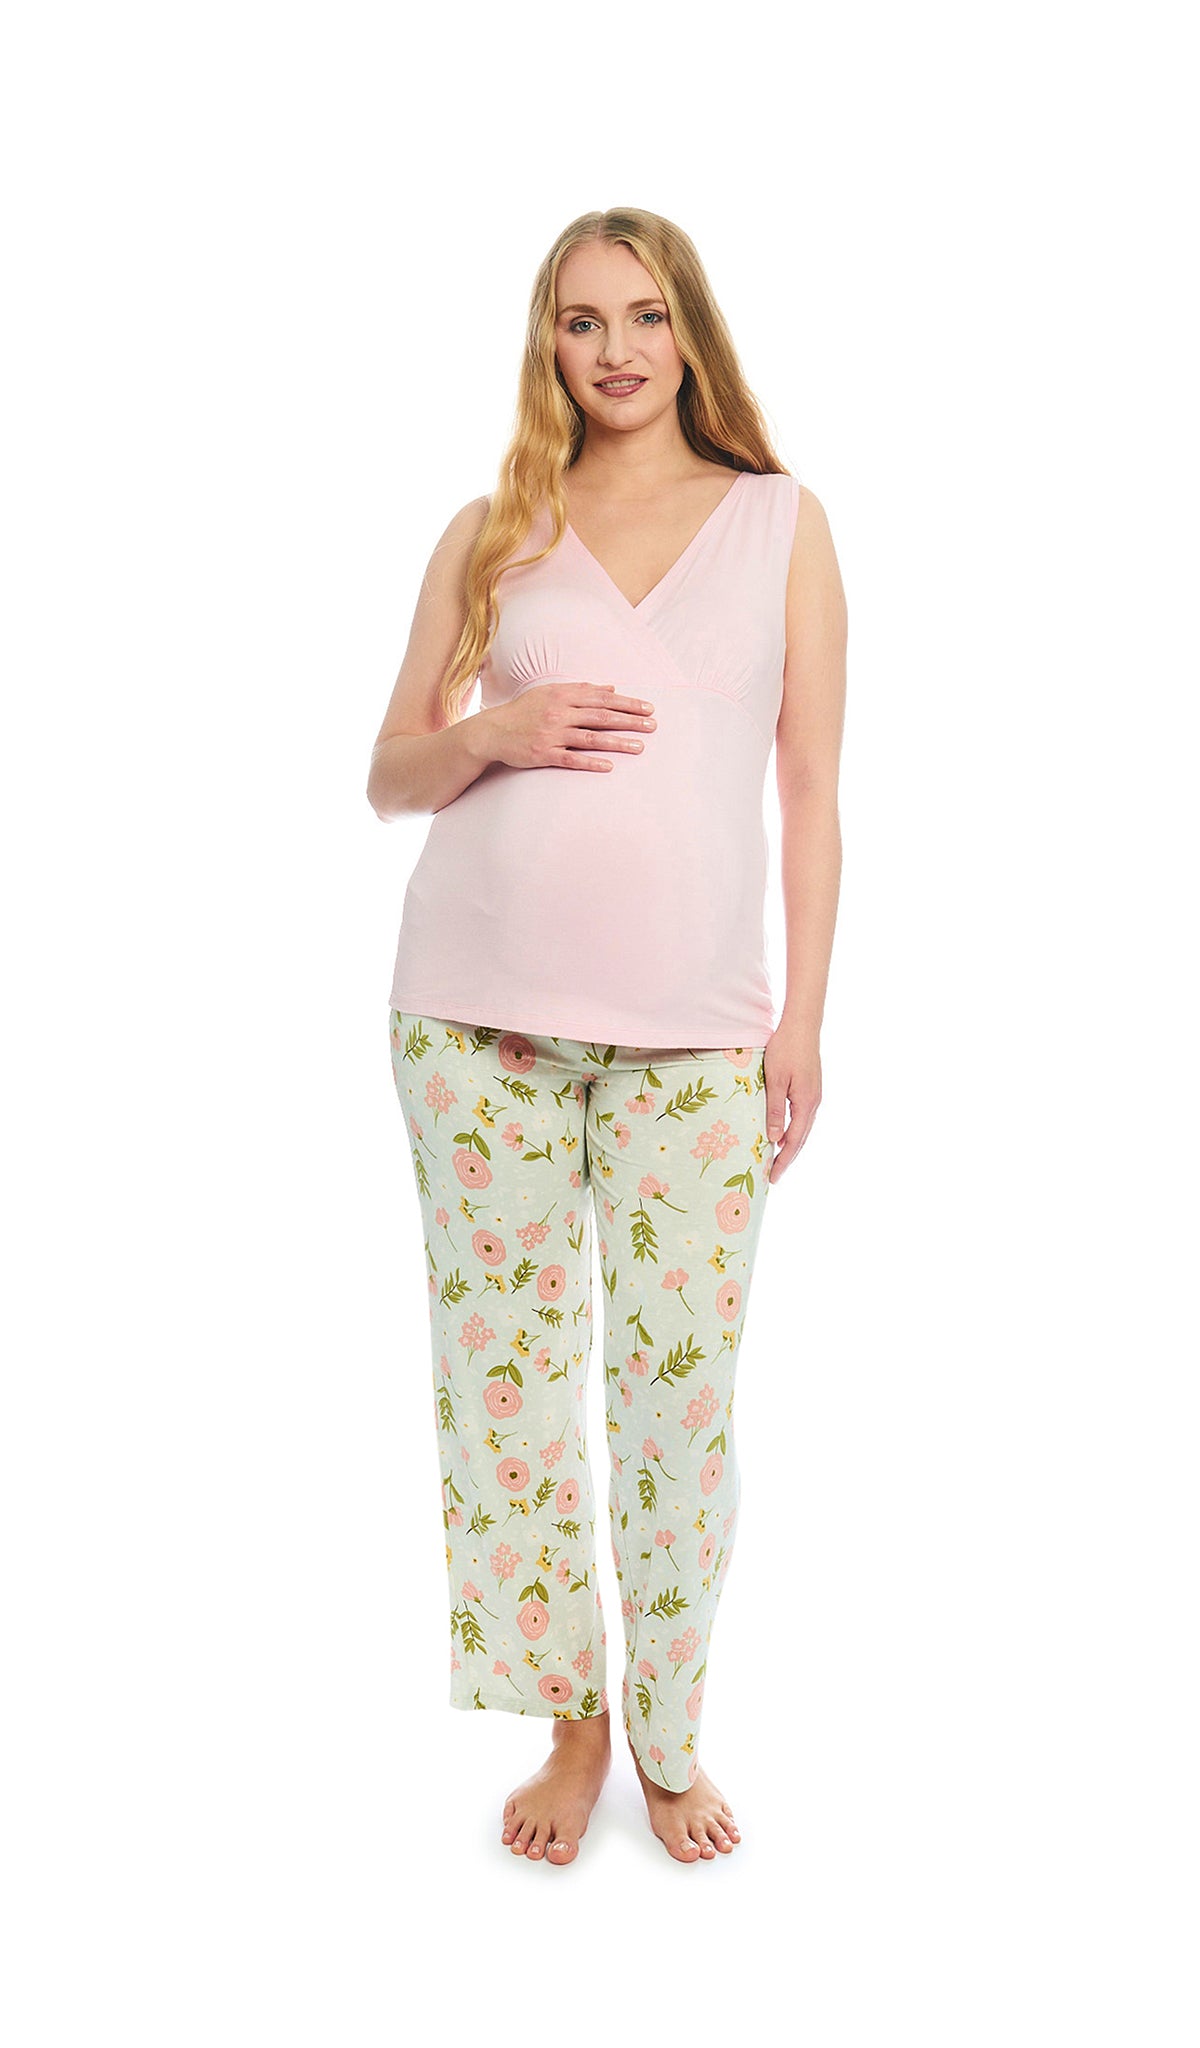 Carnation Analise 5-Piece Set, pregnant woman wearing criss-cross bust tank top and pant with one hand resting on belly.